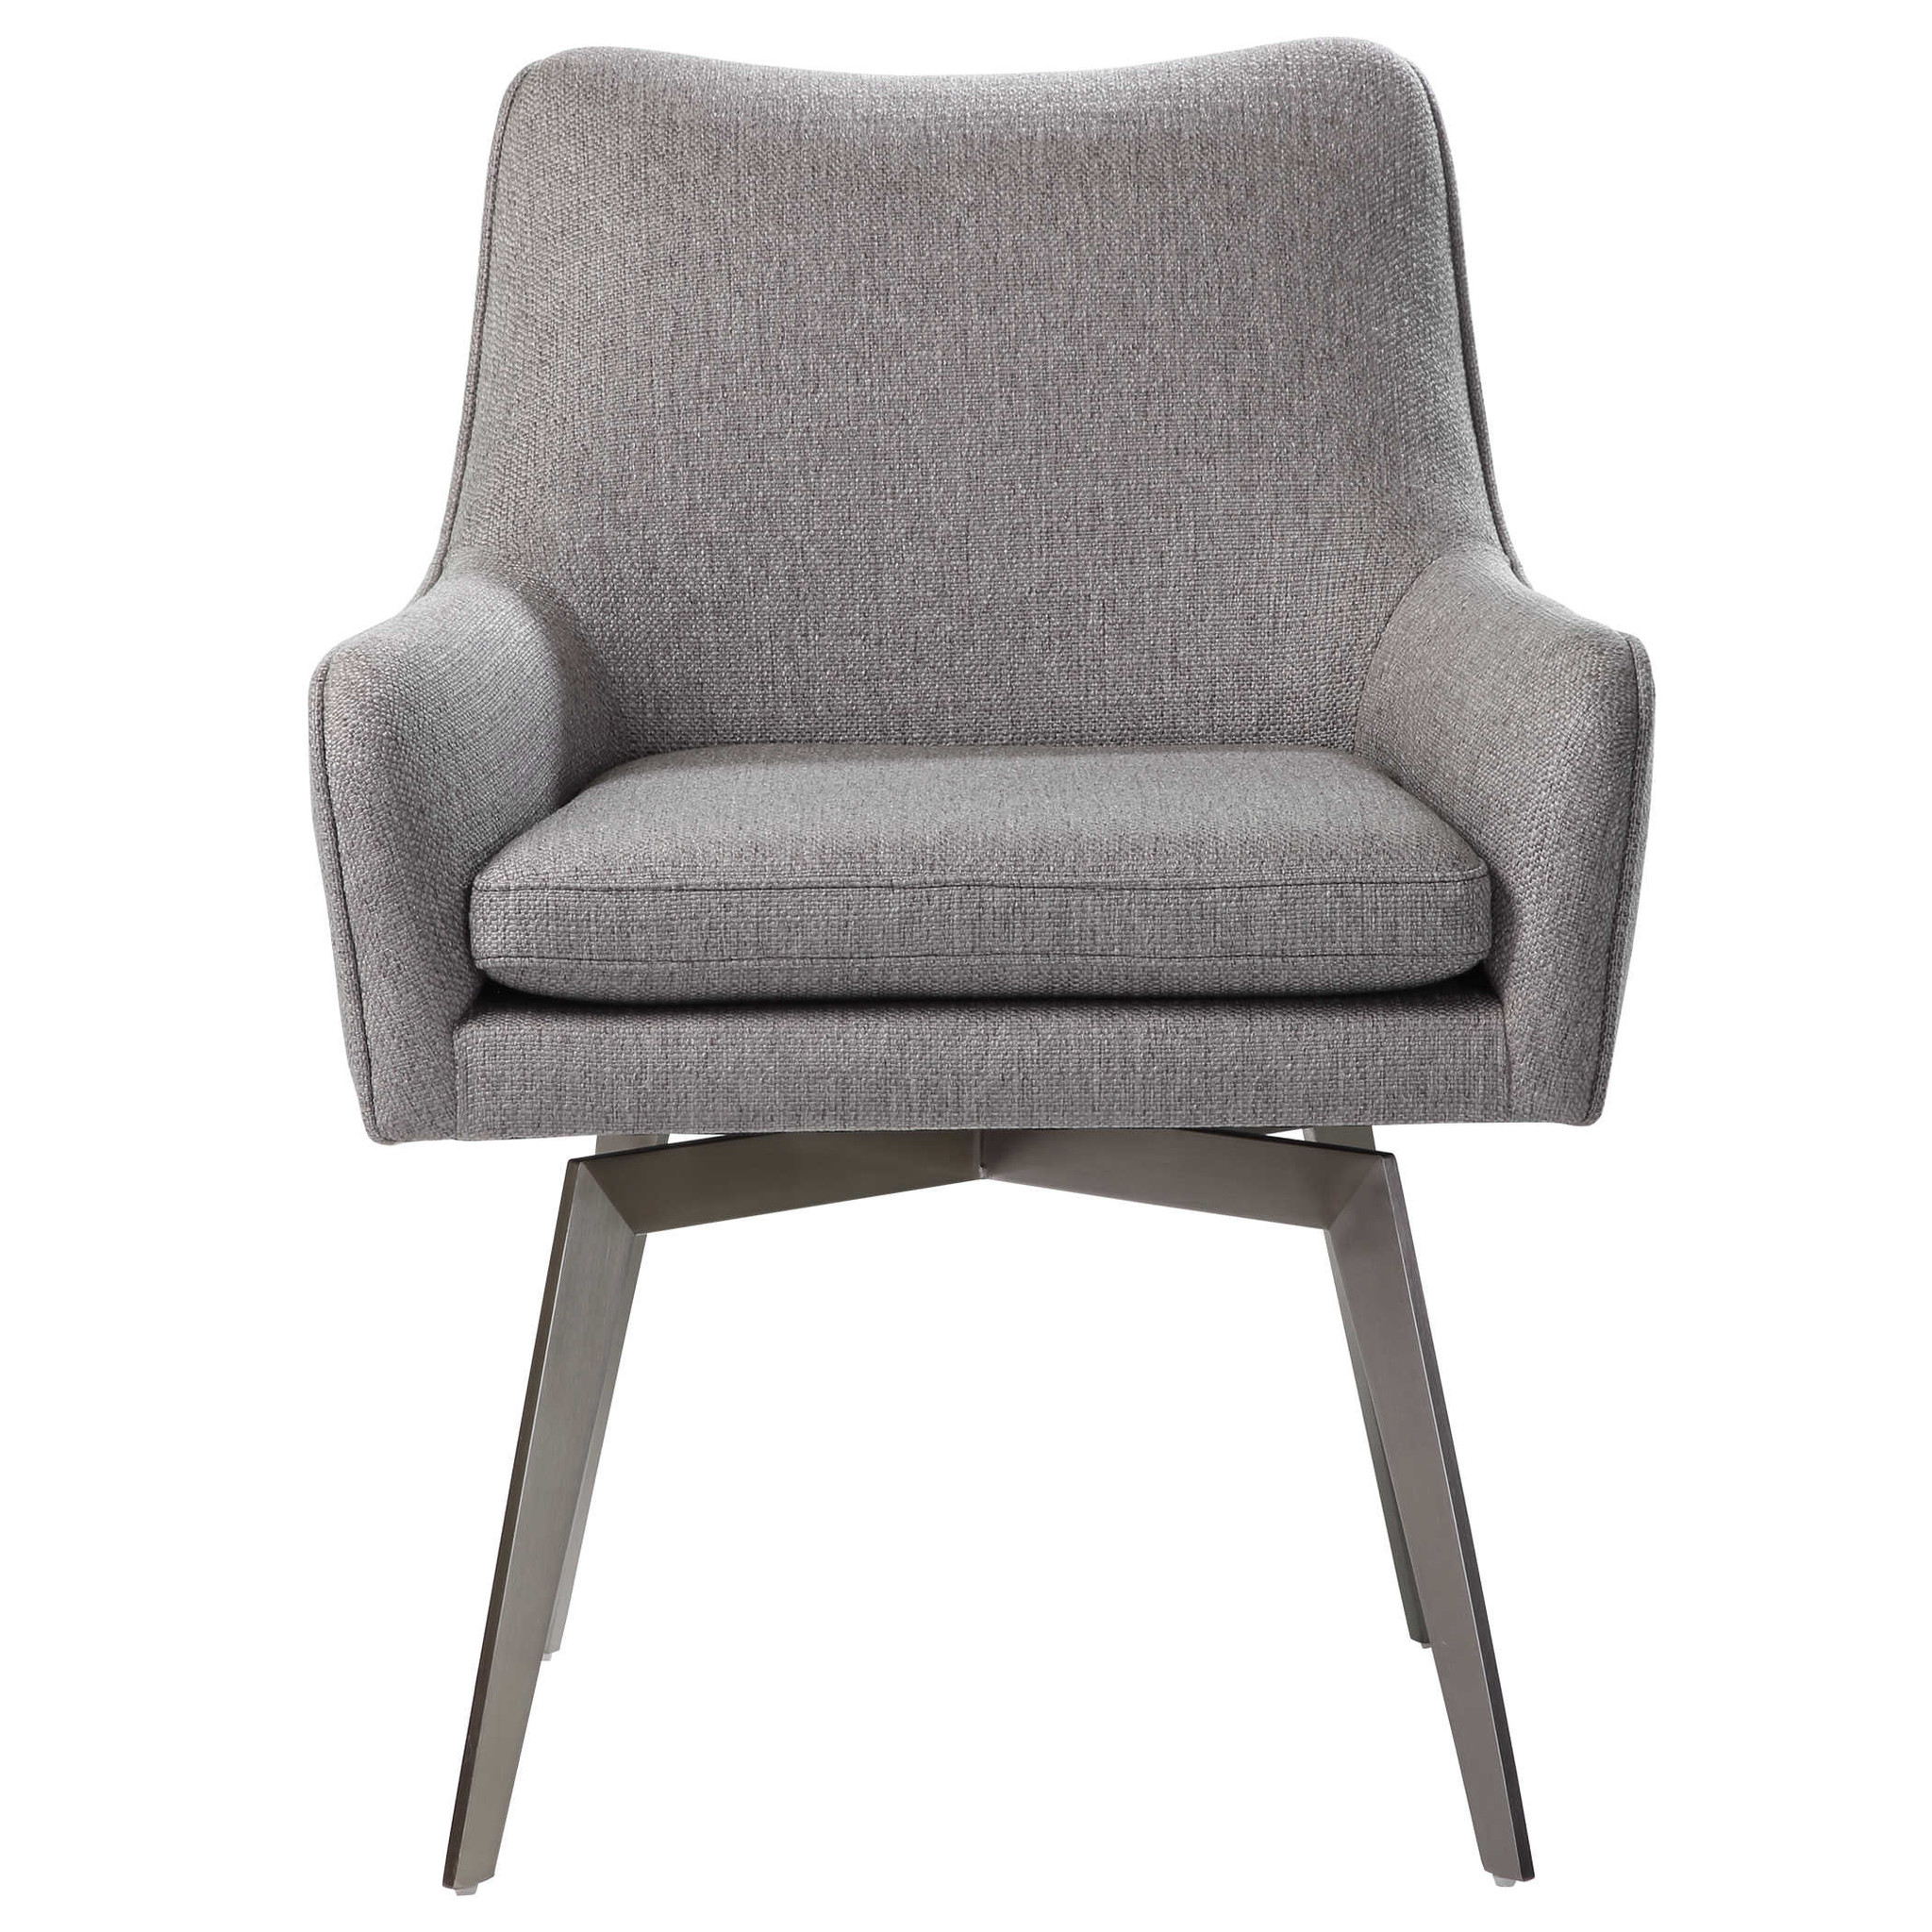 Let's Twist Dining Chair Gray